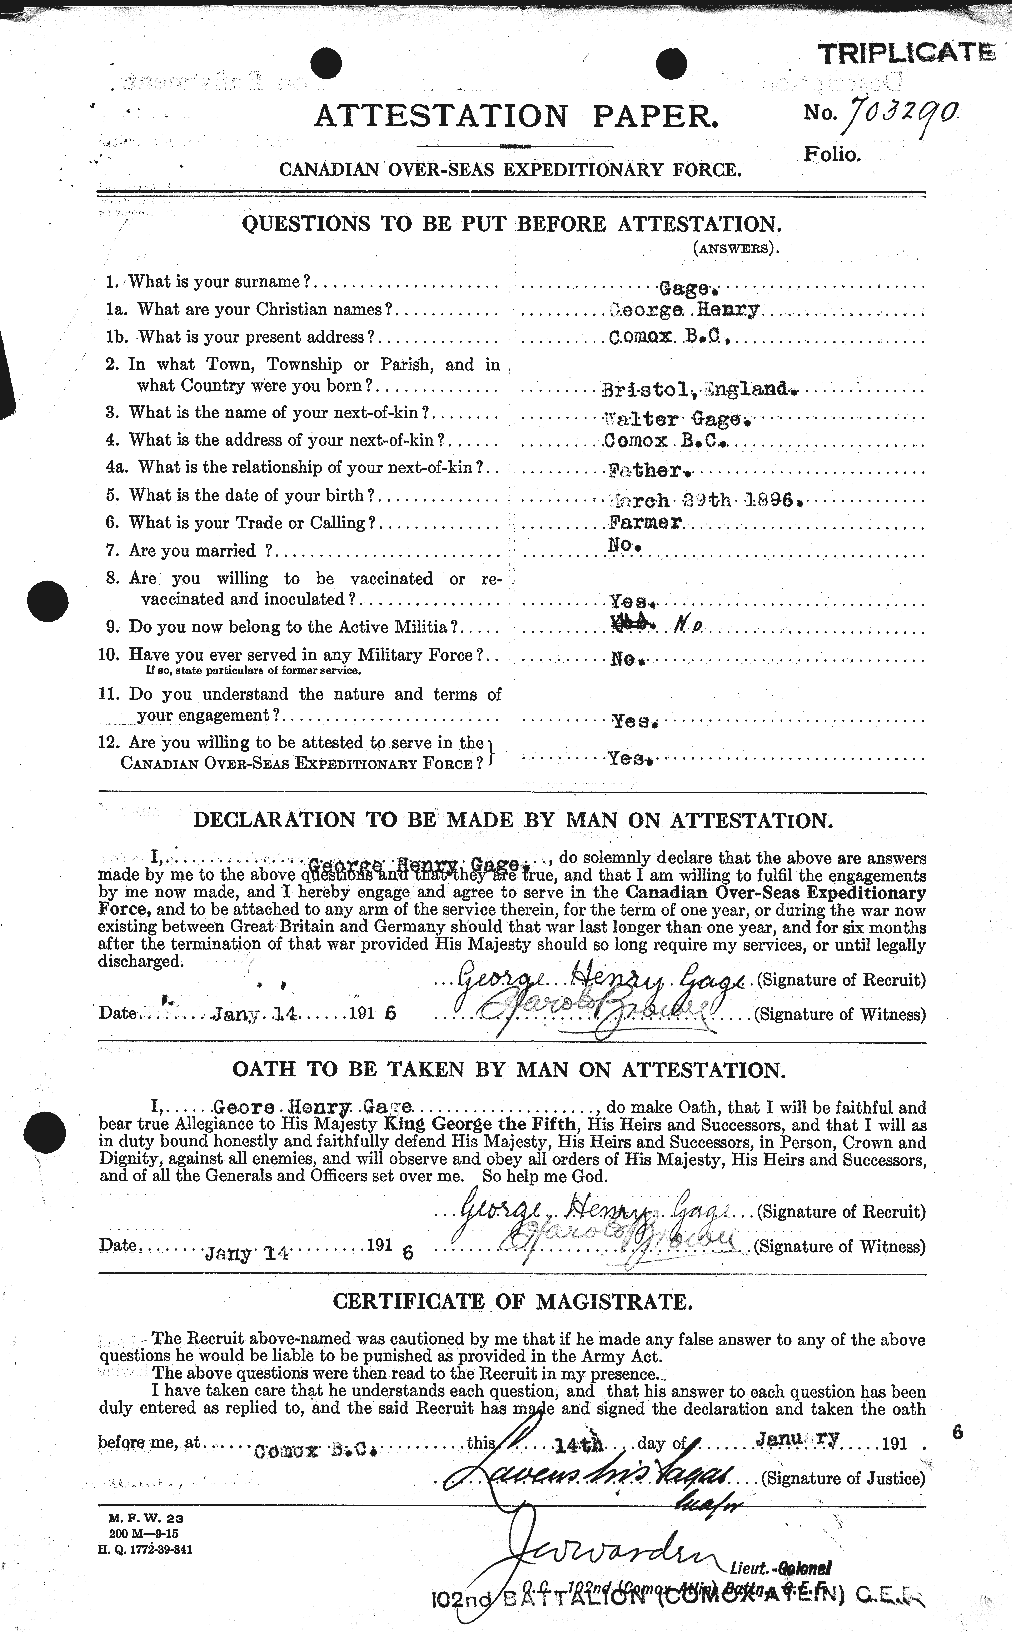 Personnel Records of the First World War - CEF 339940a